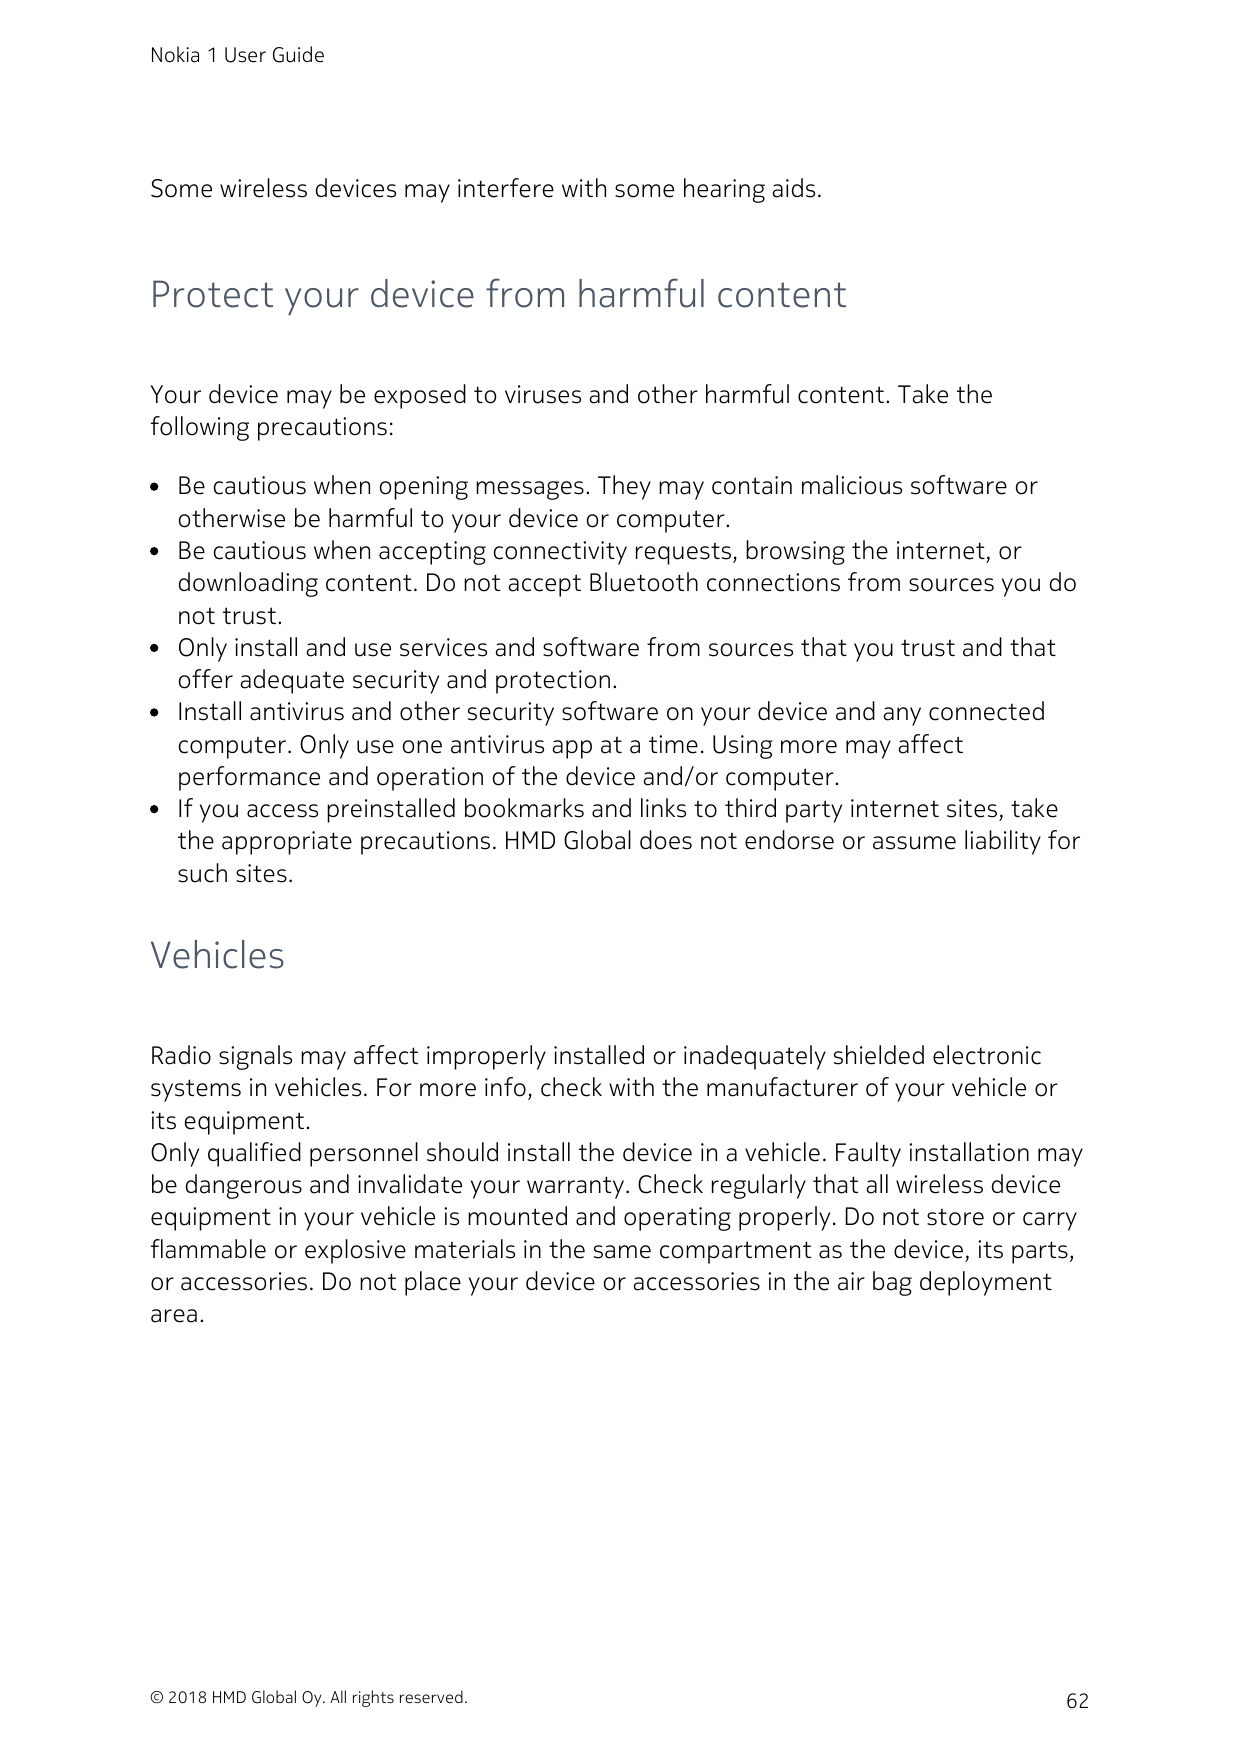 Nokia 1 User GuideSome wireless devices may interfere with some hearing aids.Protect your device from harmful contentYour device